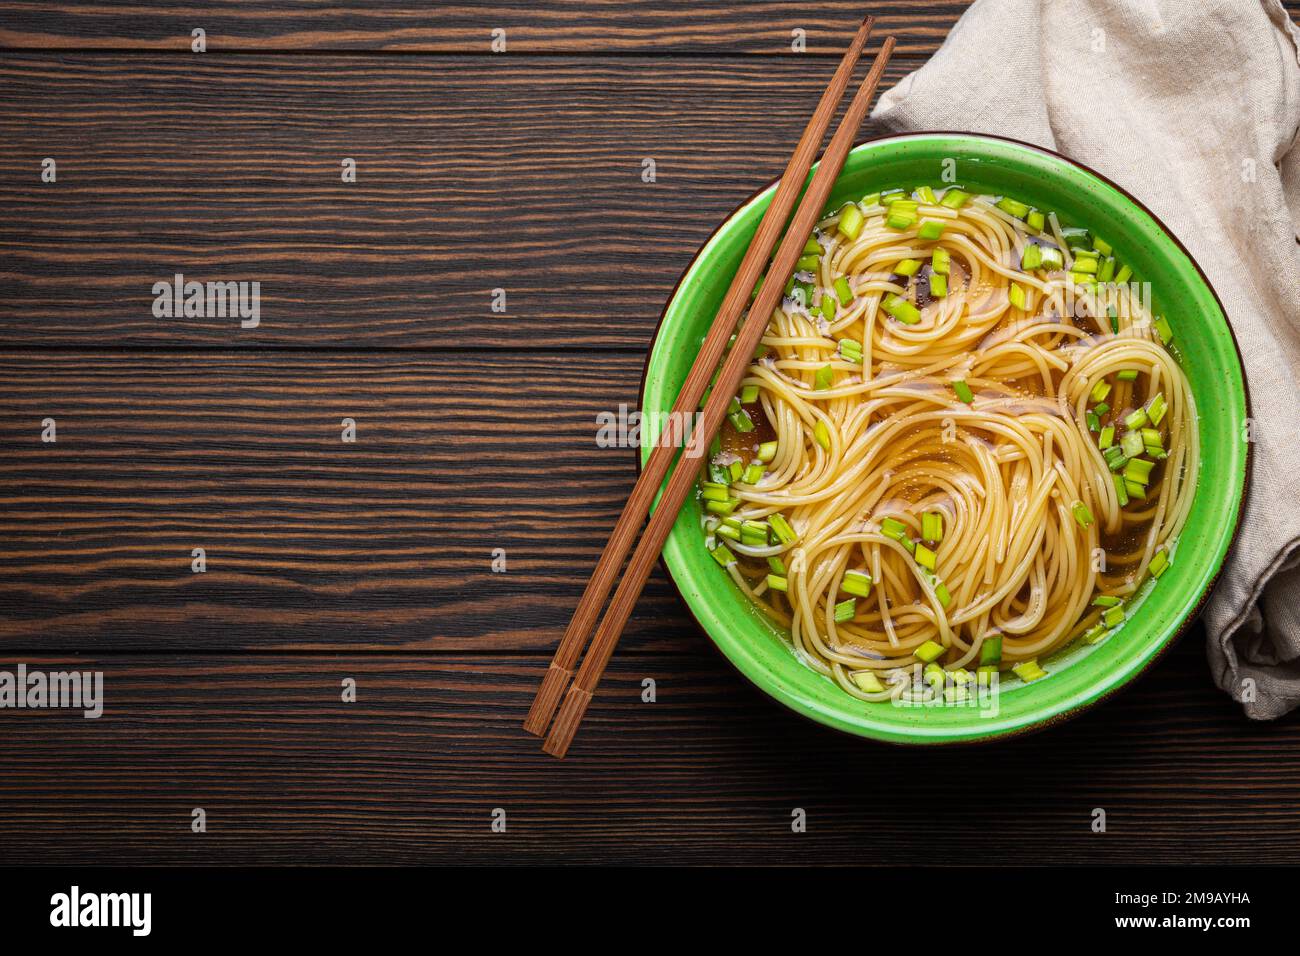 Asian noodles soup in green rustic ceramic bowl with wooden chopsticks top view on dark wooden background. Lo mein noodles with broth, green onion Stock Photo